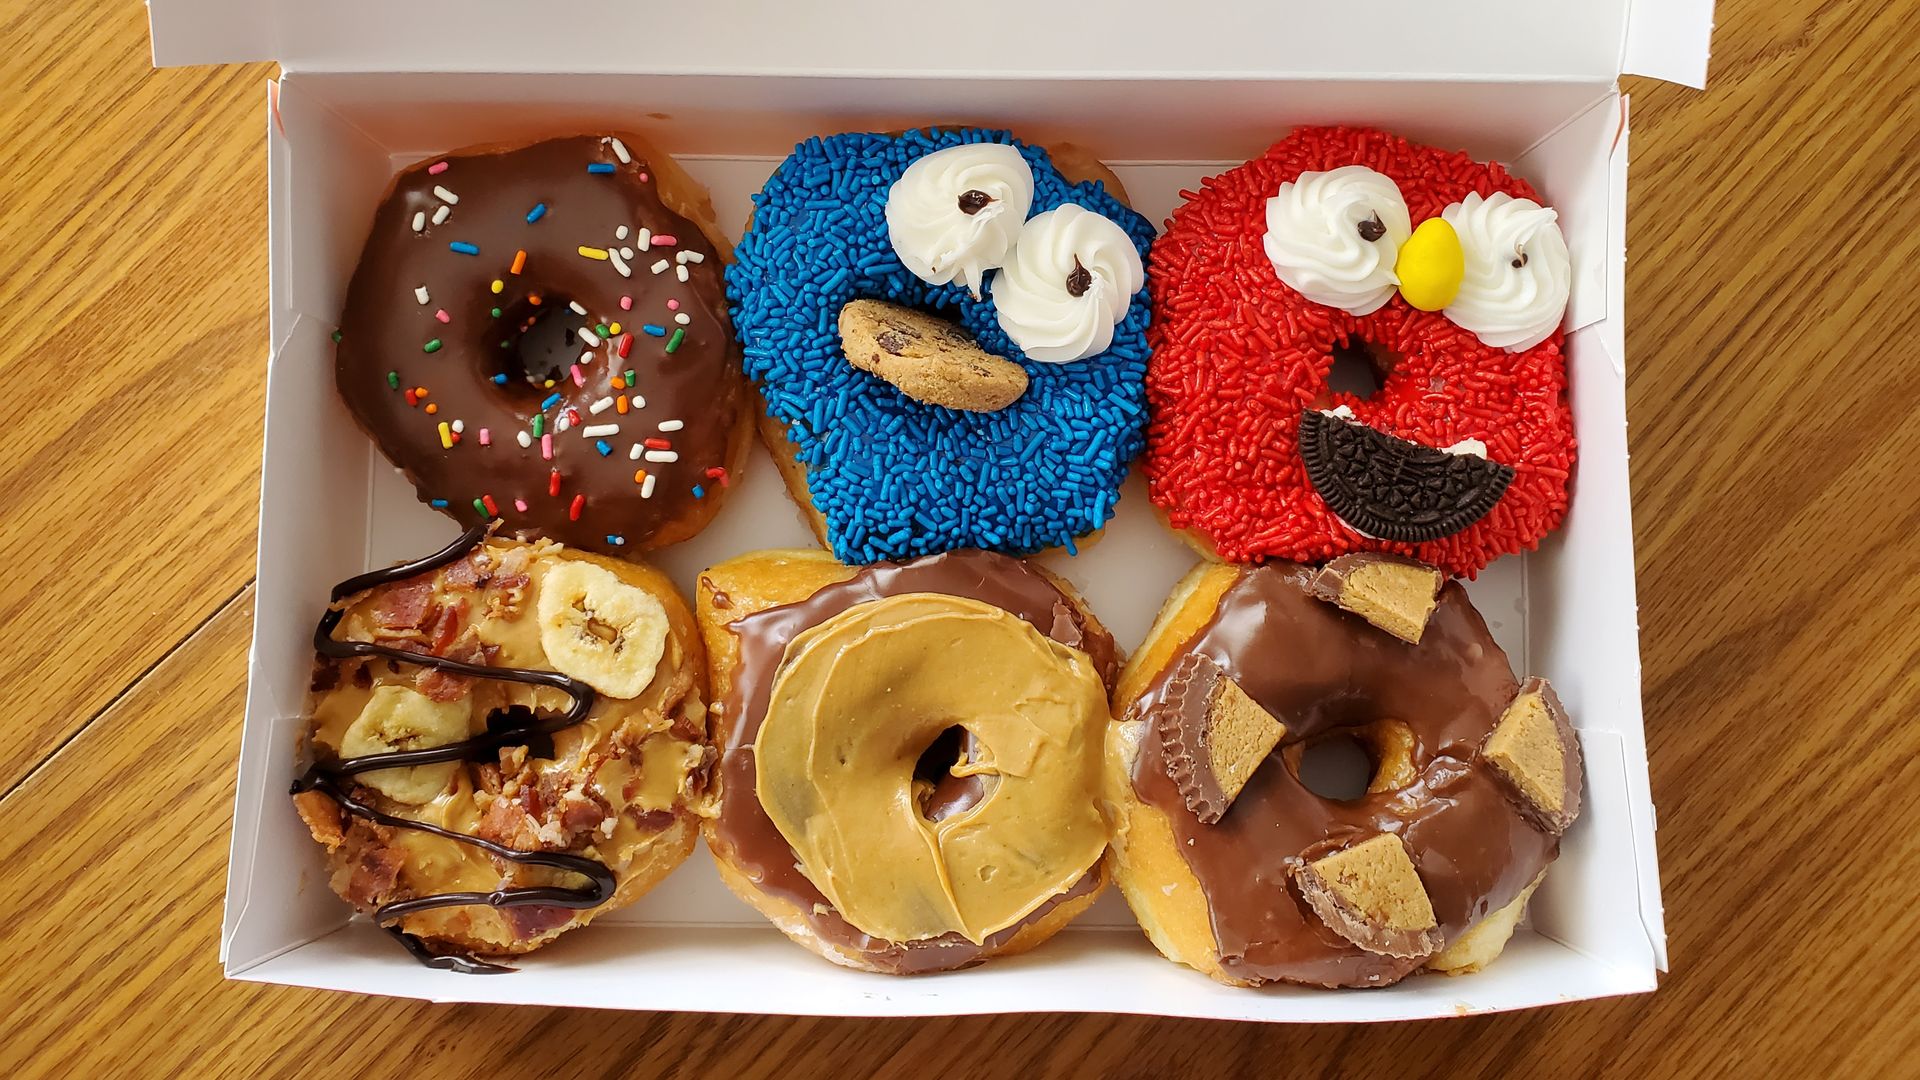 A box of six donuts, with two decorated as Elmo and Cookie Monster